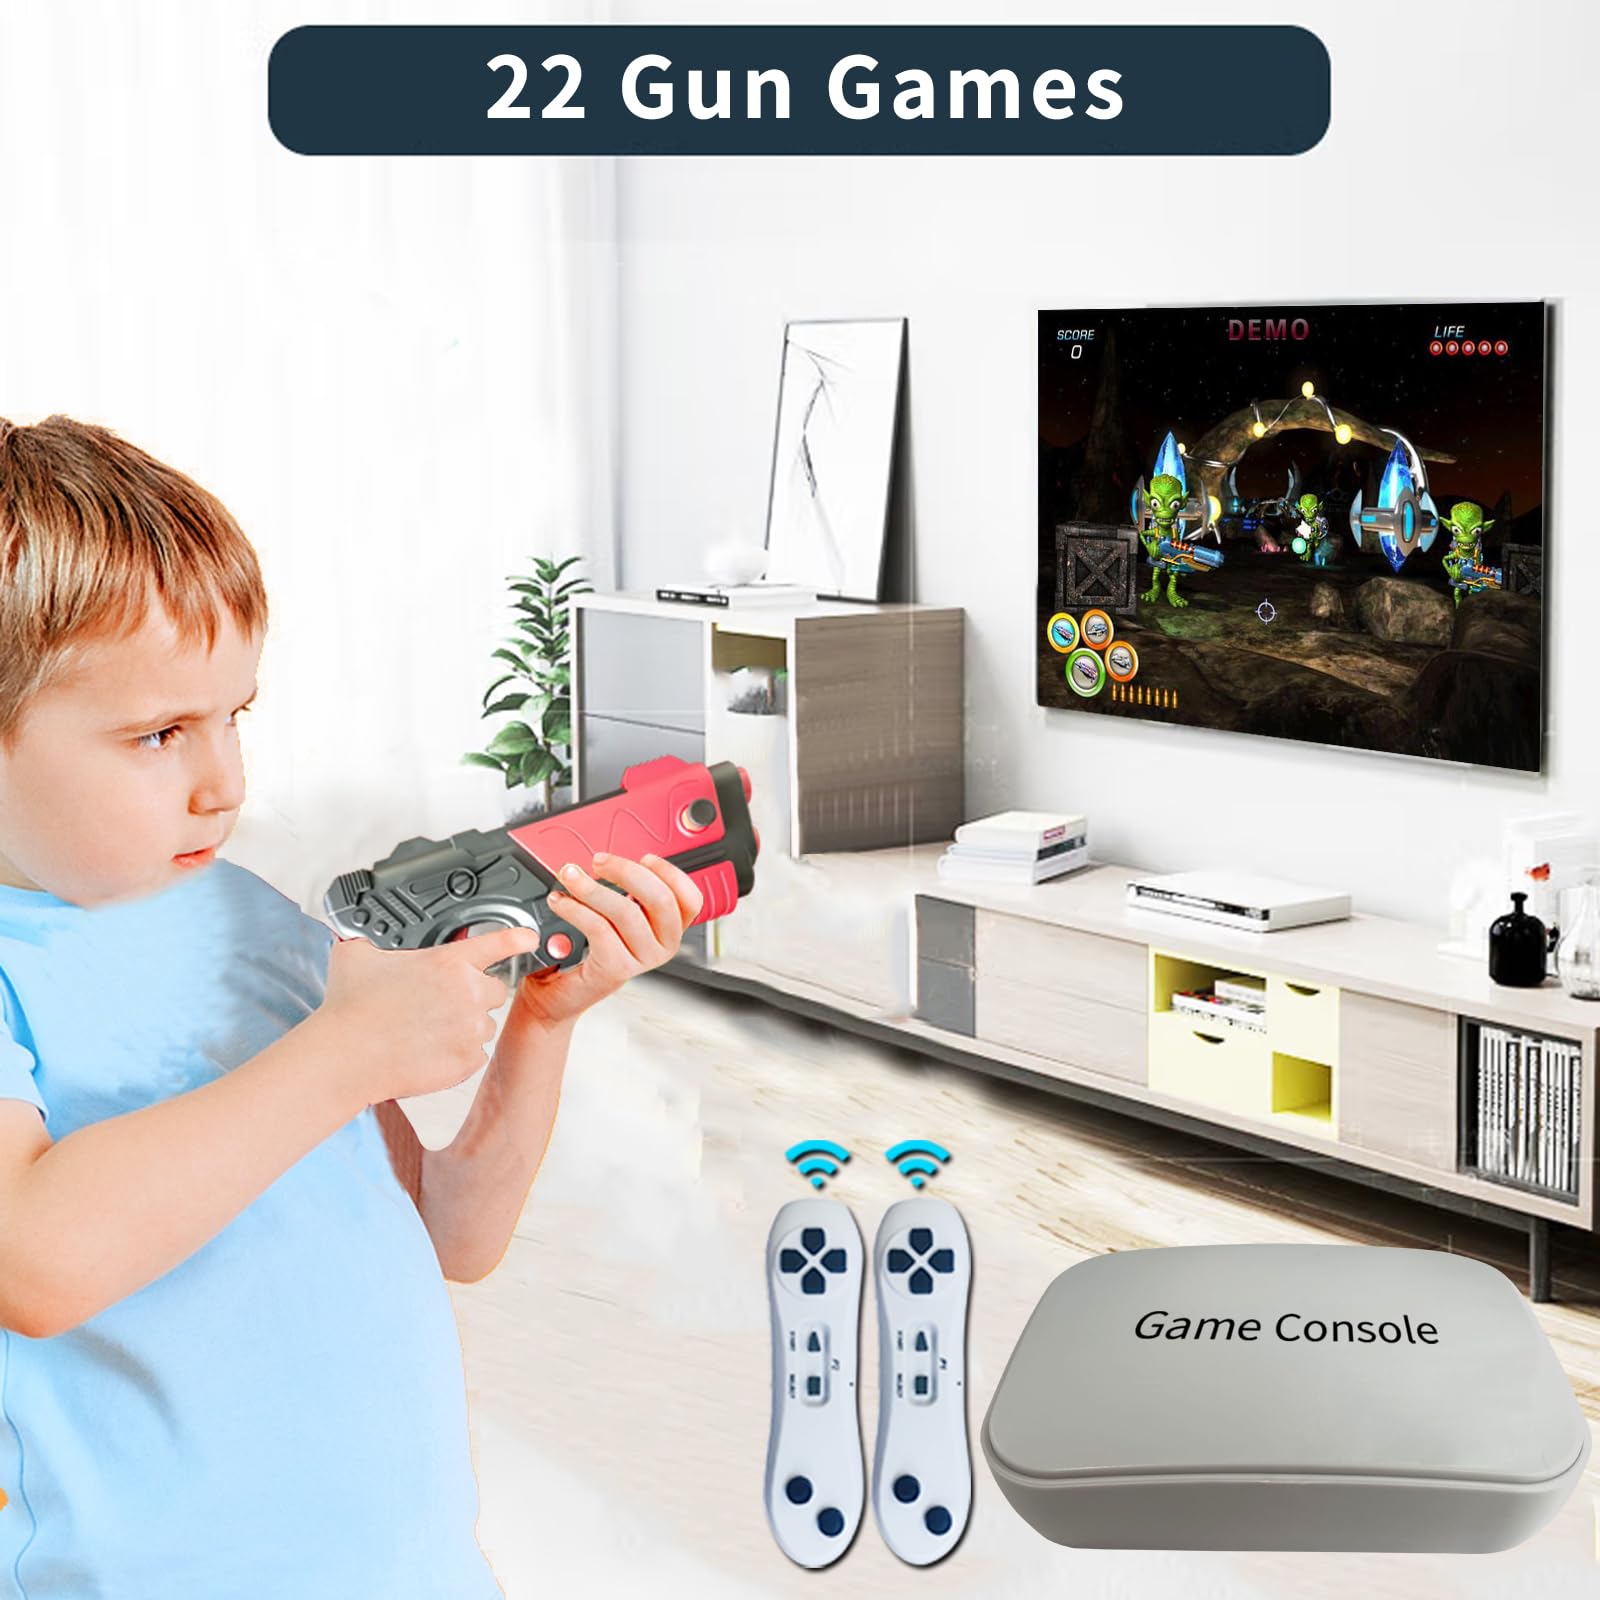 Damcoola Game Console with 900+ Games, TV Retro Video Game Console for Kids & Adults, Game Box with AR Gun Games,2 Handheld Wireless Game Controllers, Plug& Play, Toy Gift for Boys and Girls age 3 +